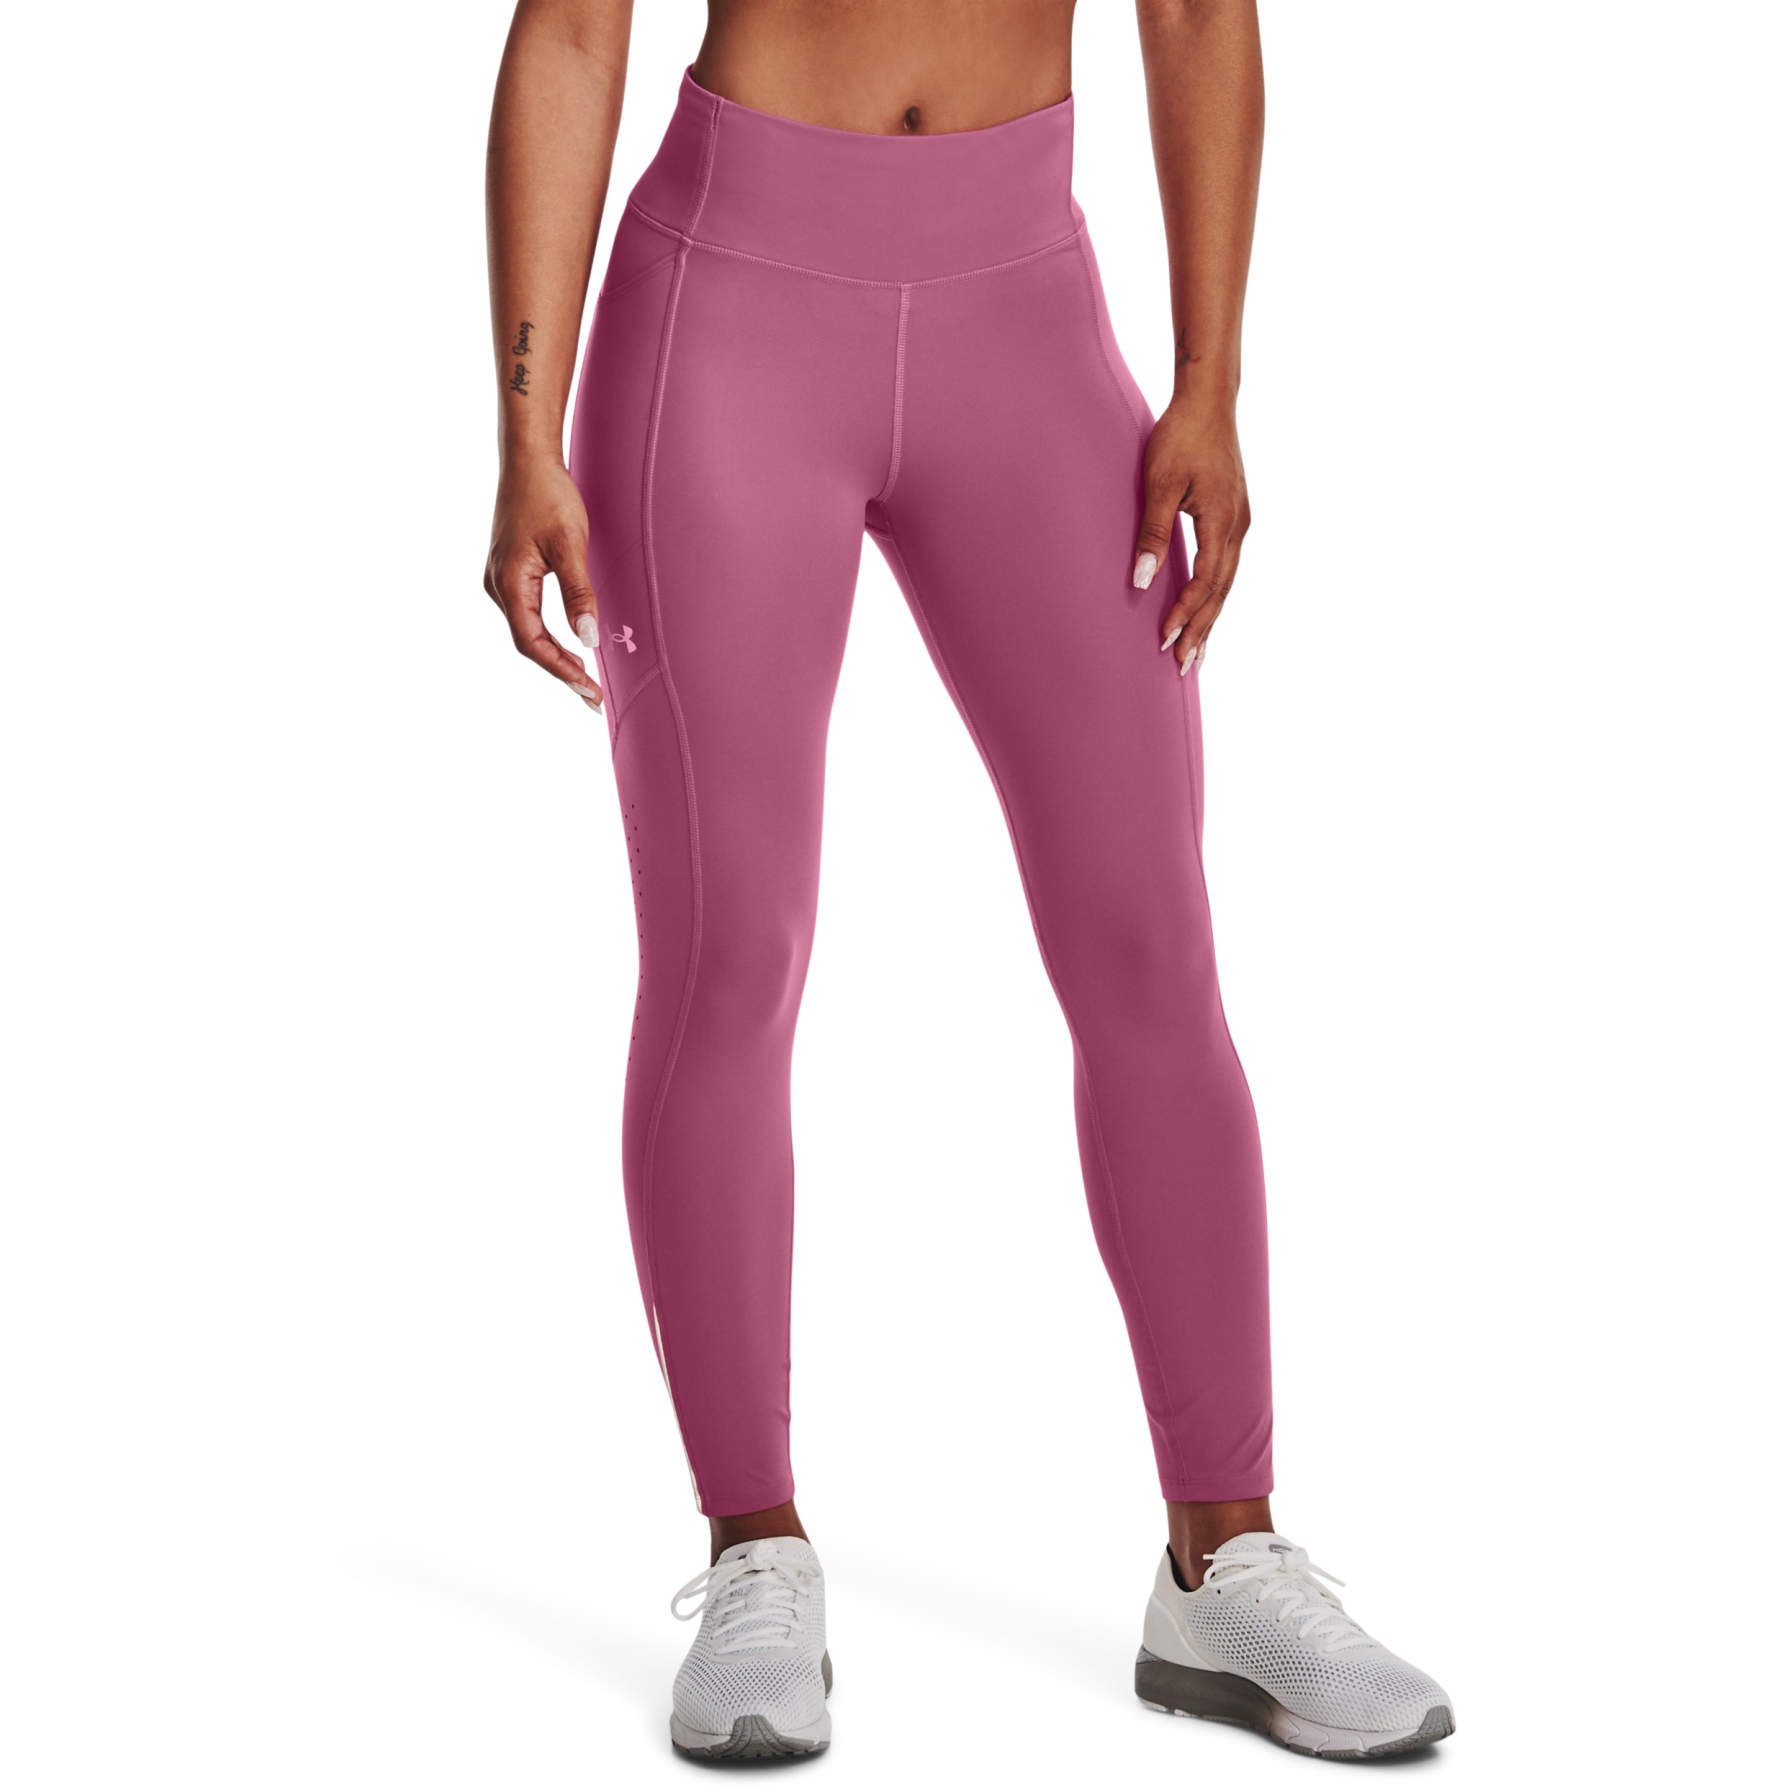 Produktbild von Under Armour UA Fly Fast 3.0 Ankle Tights Damen - Pace Pink/Pace Pink/Reflective